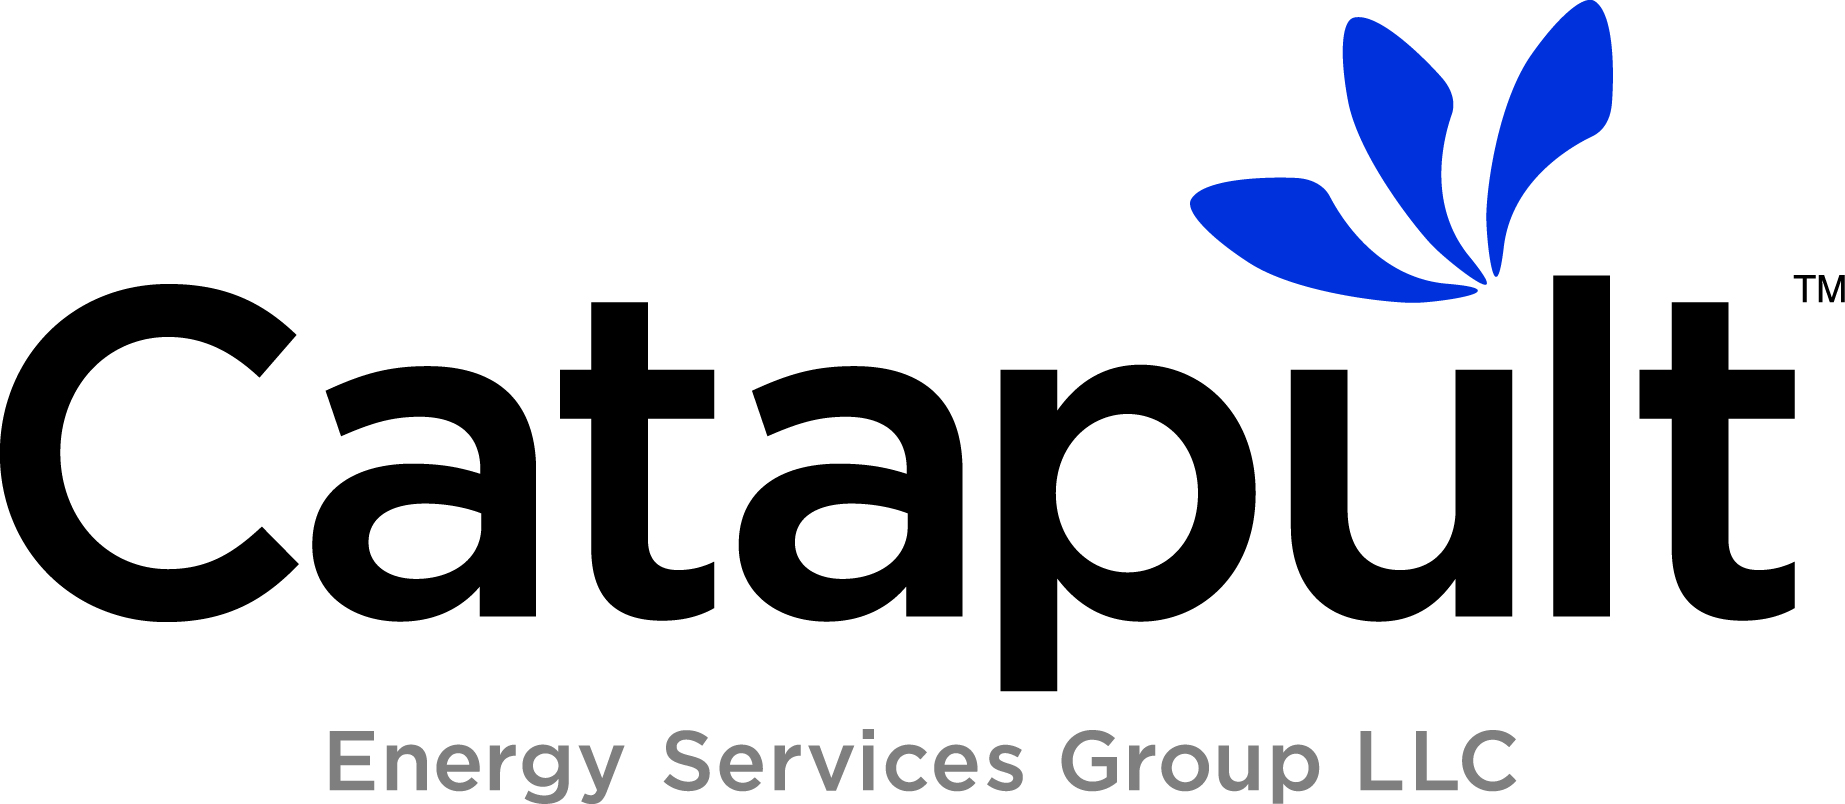 Catapult Energy Services Group Successfully Invests Start-Up Equity in ...